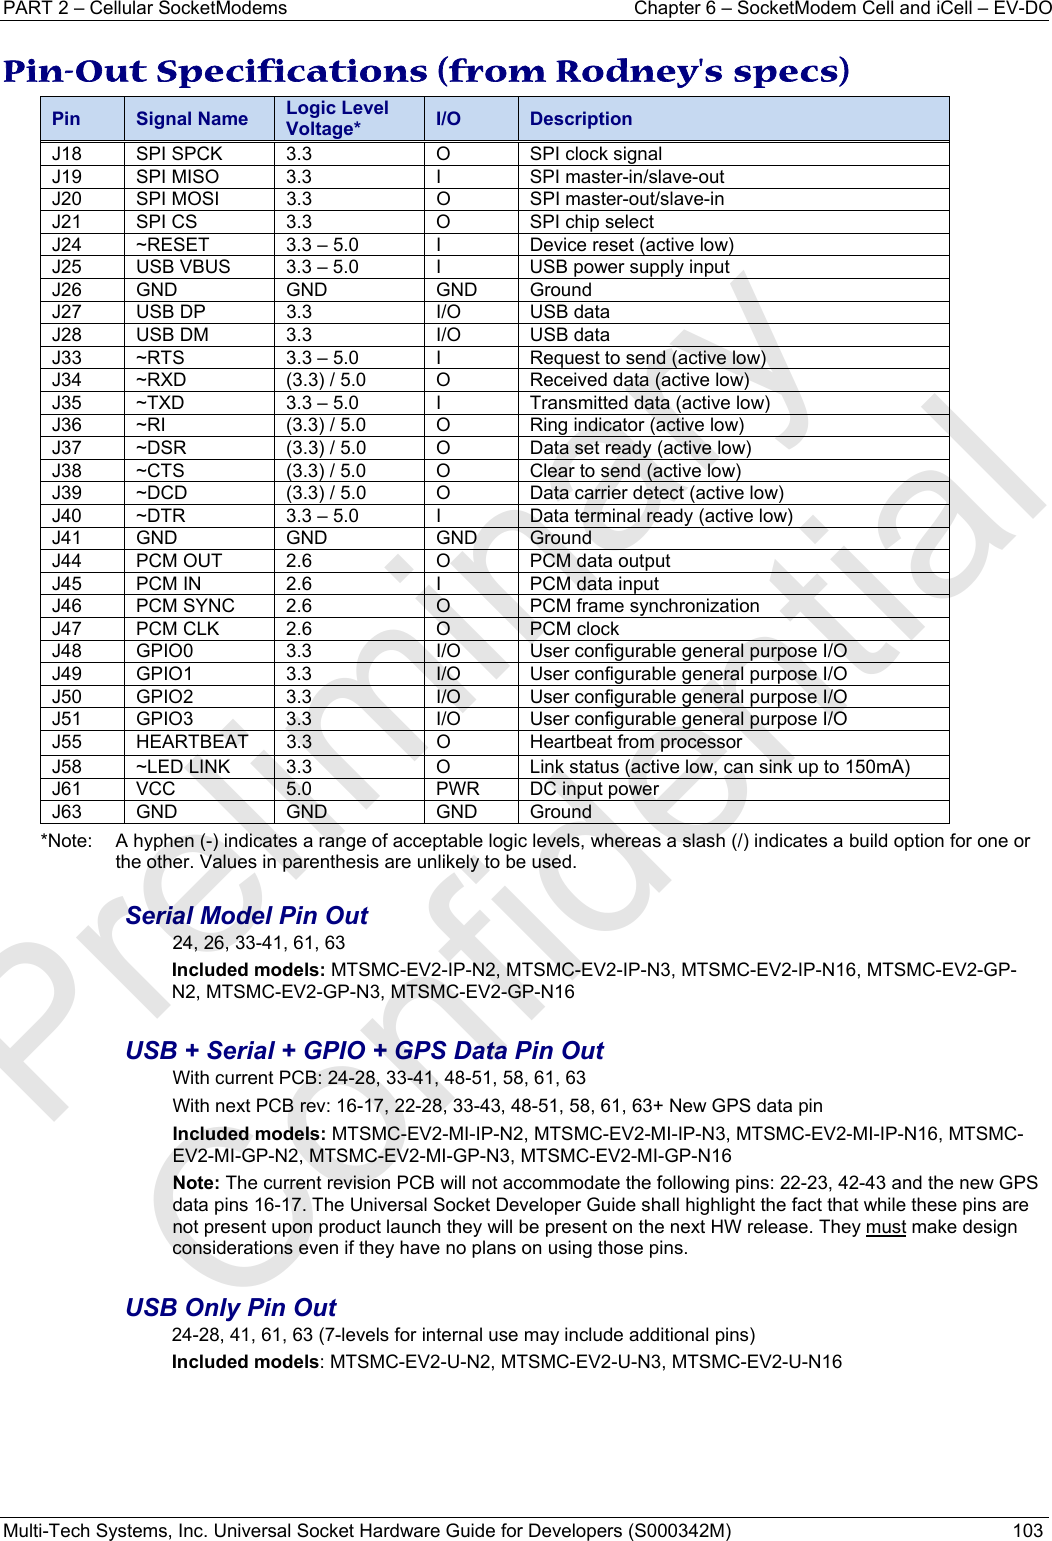 PART 2 – Cellular SocketModems  Chapter 6 – SocketModem Cell and iCell – EV-DO Multi-Tech Systems, Inc. Universal Socket Hardware Guide for Developers (S000342M)  103  Pin-Out Specifications (from Rodney&apos;s specs)  Pin  Signal Name  Logic Level Voltage*  I/O  Description J18  SPI SPCK  3.3  O  SPI clock signal J19  SPI MISO  3.3  I  SPI master-in/slave-out J20 SPI MOSI  3.3  O  SPI master-out/slave-in J21  SPI CS  3.3  O  SPI chip select J24  ~RESET  3.3 – 5.0  I  Device reset (active low) J25  USB VBUS  3.3 – 5.0  I  USB power supply input J26 GND GND GND Ground J27  USB DP  3.3  I/O  USB data J28  USB DM  3.3  I/O  USB data J33  ~RTS  3.3 – 5.0  I  Request to send (active low) J34  ~RXD  (3.3) / 5.0  O  Received data (active low) J35  ~TXD  3.3 – 5.0  I  Transmitted data (active low) J36  ~RI  (3.3) / 5.0  O  Ring indicator (active low) J37  ~DSR  (3.3) / 5.0  O  Data set ready (active low) J38  ~CTS  (3.3) / 5.0  O  Clear to send (active low) J39  ~DCD  (3.3) / 5.0  O  Data carrier detect (active low) J40  ~DTR  3.3 – 5.0  I  Data terminal ready (active low) J41 GND GND GND Ground J44  PCM OUT  2.6  O  PCM data output J45  PCM IN  2.6  I  PCM data input J46  PCM SYNC  2.6  O  PCM frame synchronization J47  PCM CLK  2.6  O  PCM clock J48 GPIO0  3.3  I/O  User configurable general purpose I/O J49 GPIO1  3.3  I/O  User configurable general purpose I/O J50 GPIO2  3.3  I/O  User configurable general purpose I/O J51 GPIO3  3.3  I/O  User configurable general purpose I/O J55  HEARTBEAT  3.3  O  Heartbeat from processor J58  ~LED LINK  3.3  O  Link status (active low, can sink up to 150mA) J61  VCC  5.0  PWR  DC input power J63 GND GND GND Ground *Note:  A hyphen (-) indicates a range of acceptable logic levels, whereas a slash (/) indicates a build option for one or the other. Values in parenthesis are unlikely to be used.  Serial Model Pin Out 24, 26, 33-41, 61, 63 Included models: MTSMC-EV2-IP-N2, MTSMC-EV2-IP-N3, MTSMC-EV2-IP-N16, MTSMC-EV2-GP-N2, MTSMC-EV2-GP-N3, MTSMC-EV2-GP-N16  USB + Serial + GPIO + GPS Data Pin Out With current PCB: 24-28, 33-41, 48-51, 58, 61, 63 With next PCB rev: 16-17, 22-28, 33-43, 48-51, 58, 61, 63+ New GPS data pin Included models: MTSMC-EV2-MI-IP-N2, MTSMC-EV2-MI-IP-N3, MTSMC-EV2-MI-IP-N16, MTSMC-EV2-MI-GP-N2, MTSMC-EV2-MI-GP-N3, MTSMC-EV2-MI-GP-N16 Note: The current revision PCB will not accommodate the following pins: 22-23, 42-43 and the new GPS data pins 16-17. The Universal Socket Developer Guide shall highlight the fact that while these pins are not present upon product launch they will be present on the next HW release. They must make design considerations even if they have no plans on using those pins.     USB Only Pin Out  24-28, 41, 61, 63 (7-levels for internal use may include additional pins) Included models: MTSMC-EV2-U-N2, MTSMC-EV2-U-N3, MTSMC-EV2-U-N16   Preliminary  Confidential